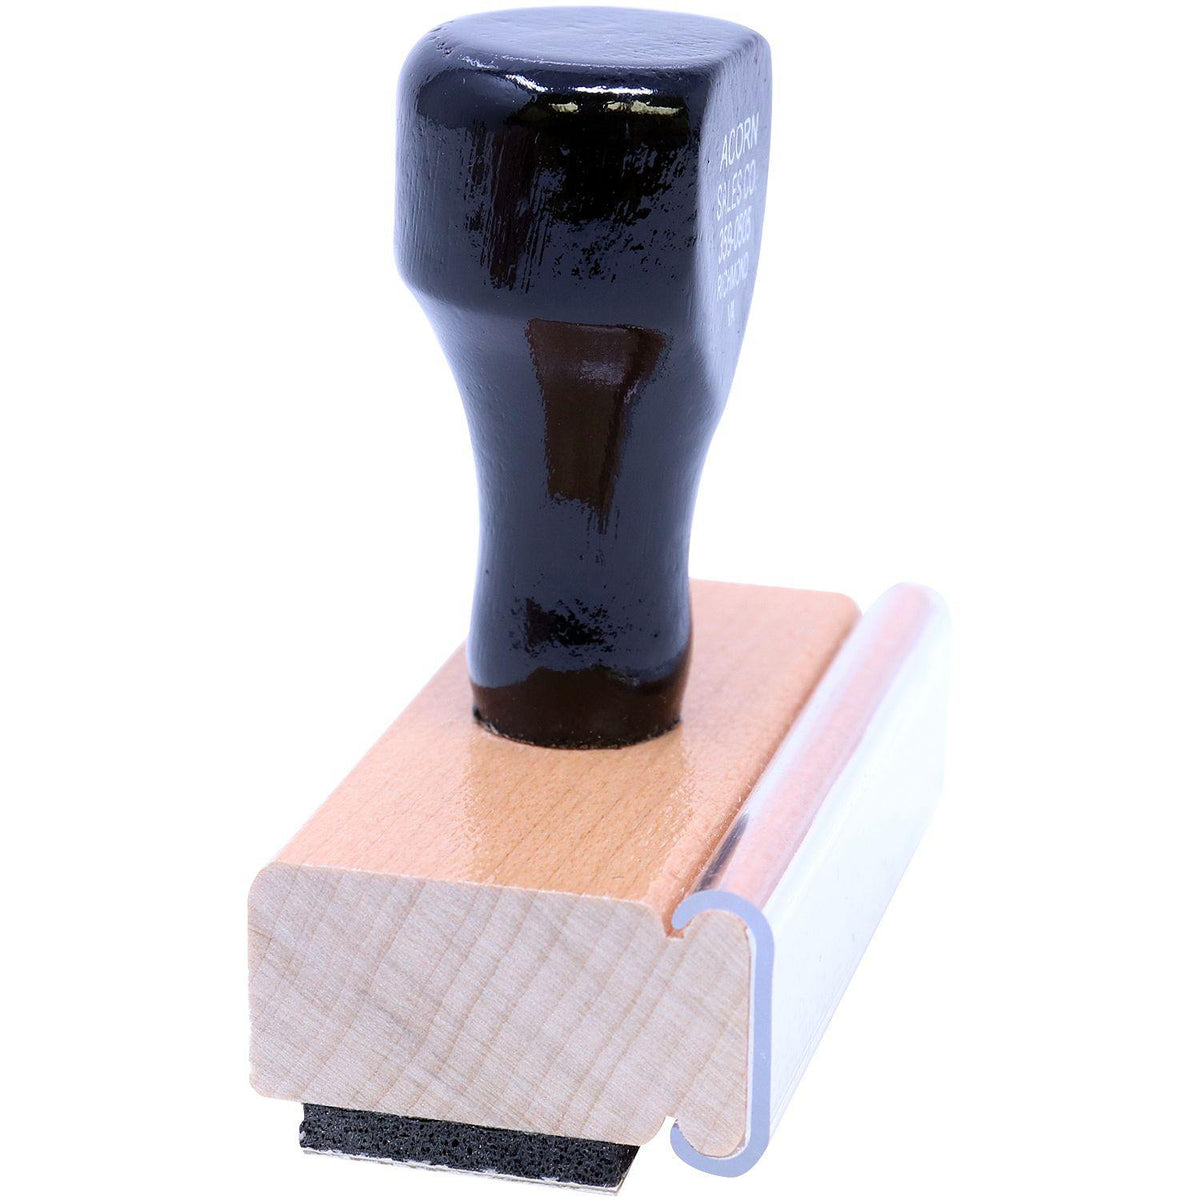 Side View of Large Creditors Exhibit Rubber Stamp at an Angle